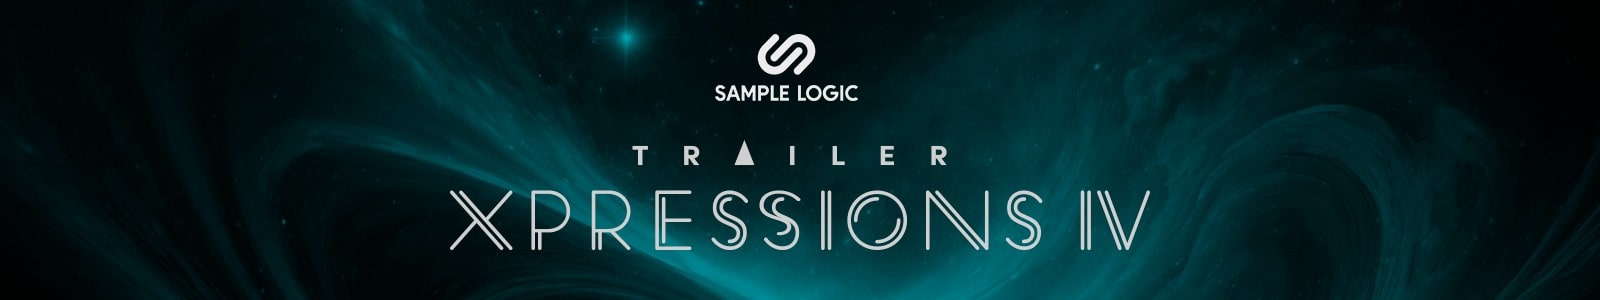 Trailer Xpressions IV by Sample Logic